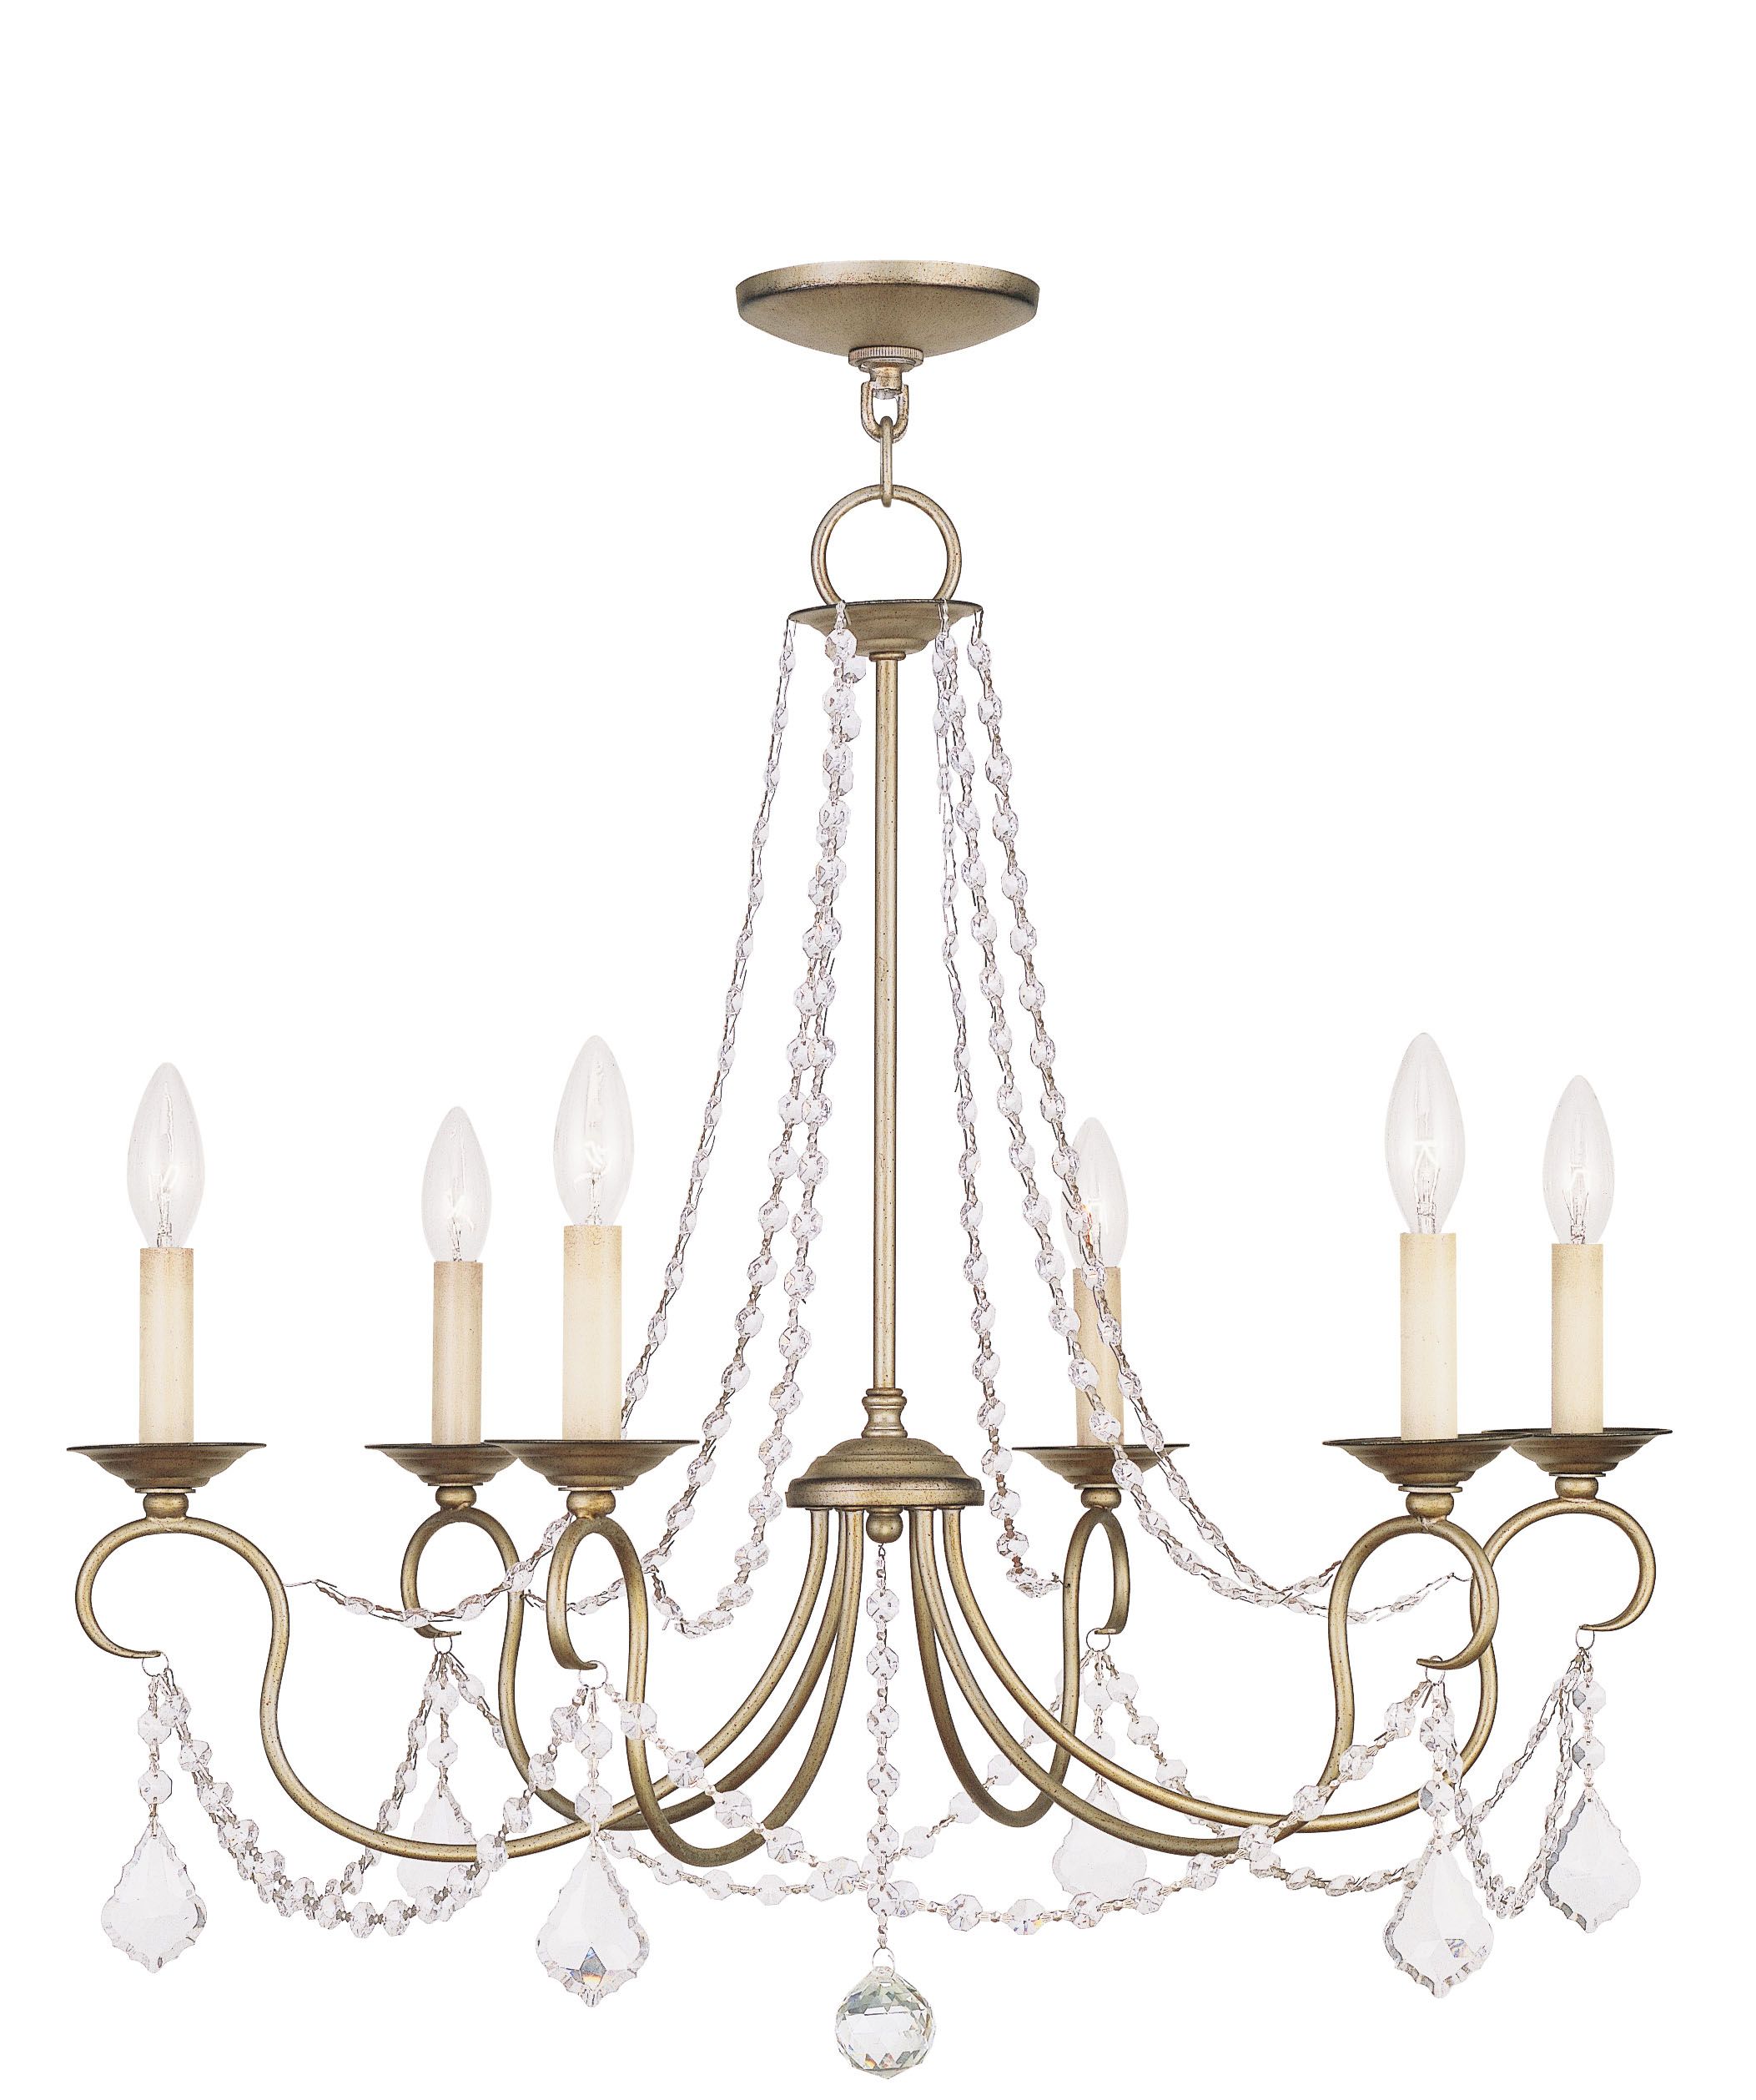 Livex Lighting Pennington Chandelier Hand Painted Antique Throughout Four Light Antique Silver Chandeliers (View 5 of 15)